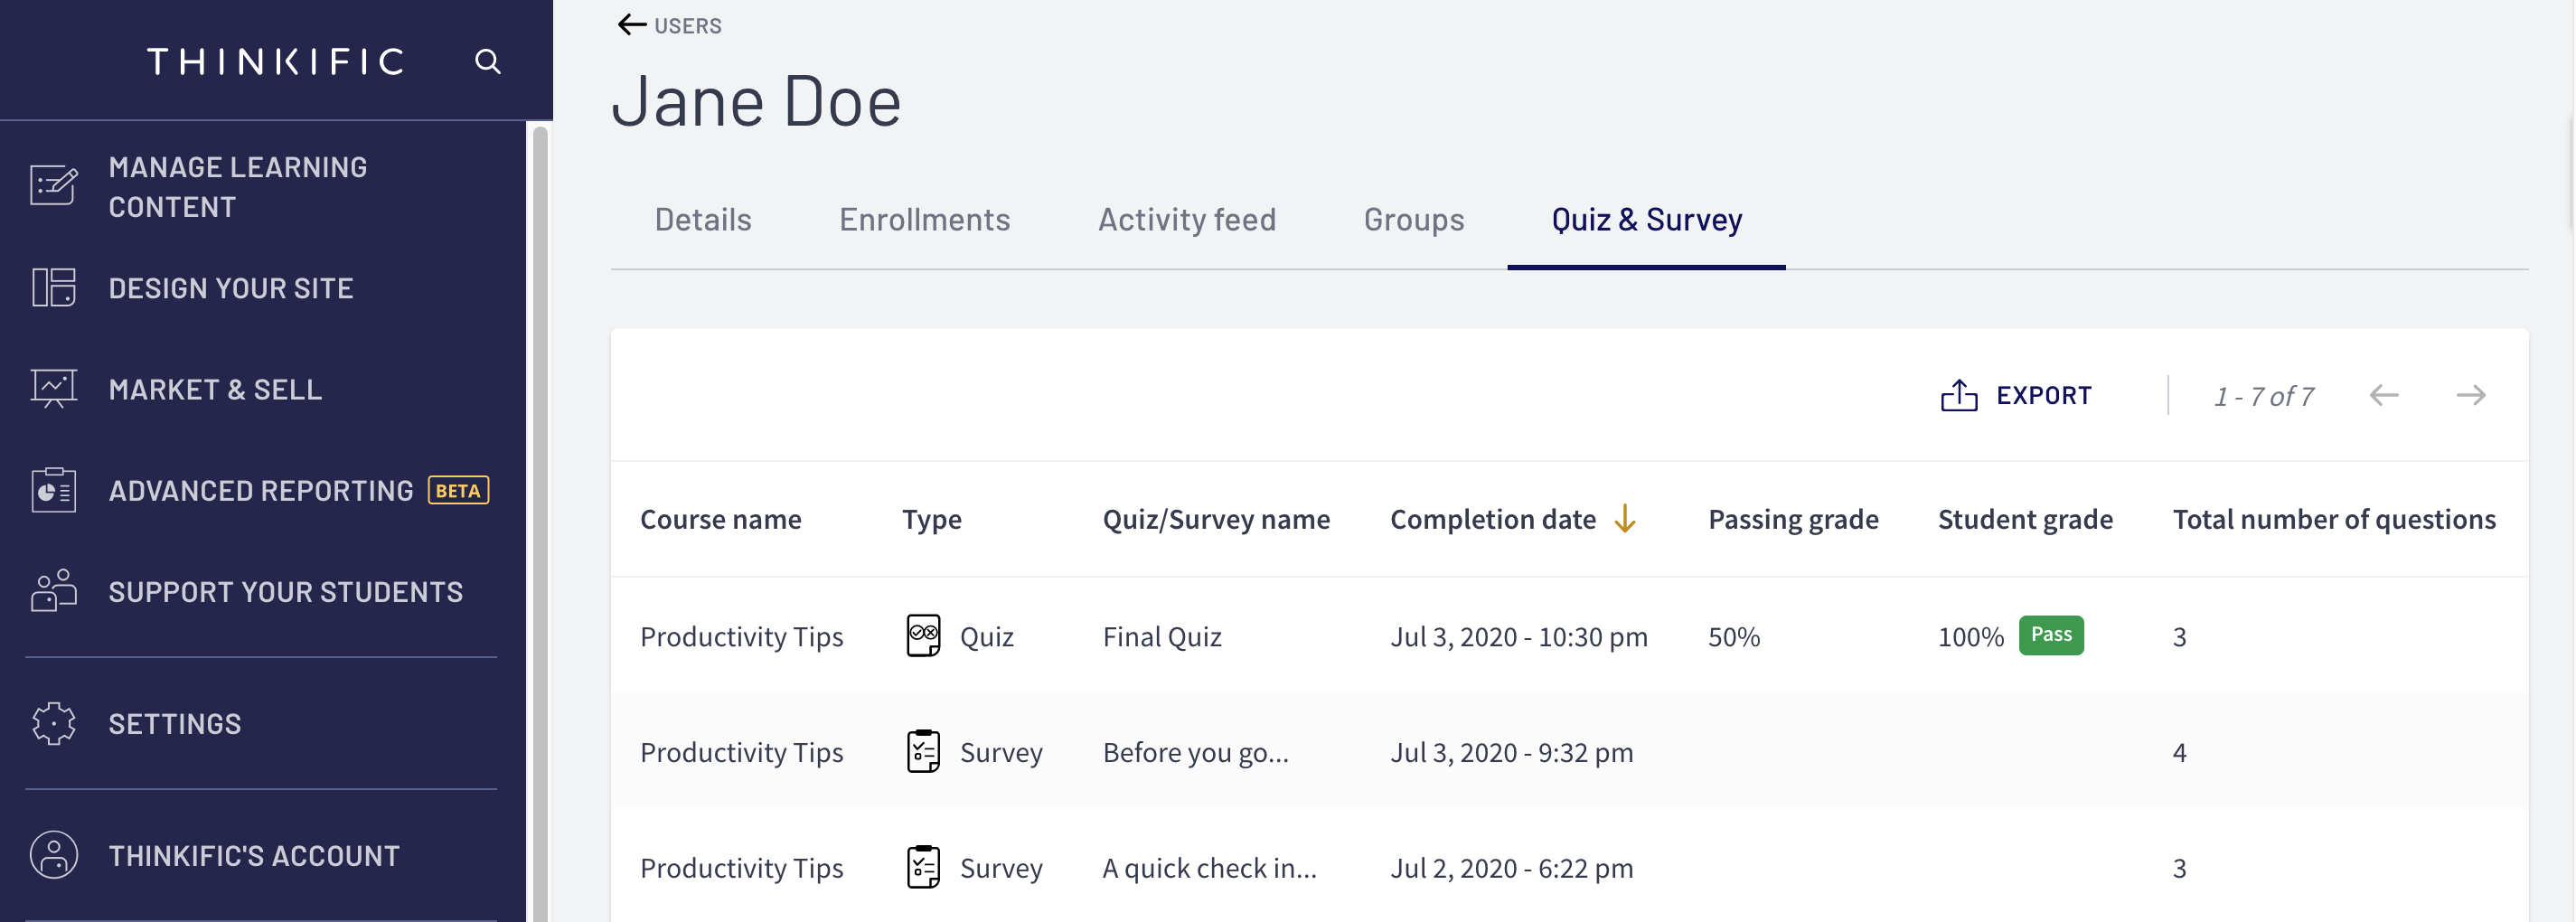 Quiz_and_survey_tab_within_student_profile.png